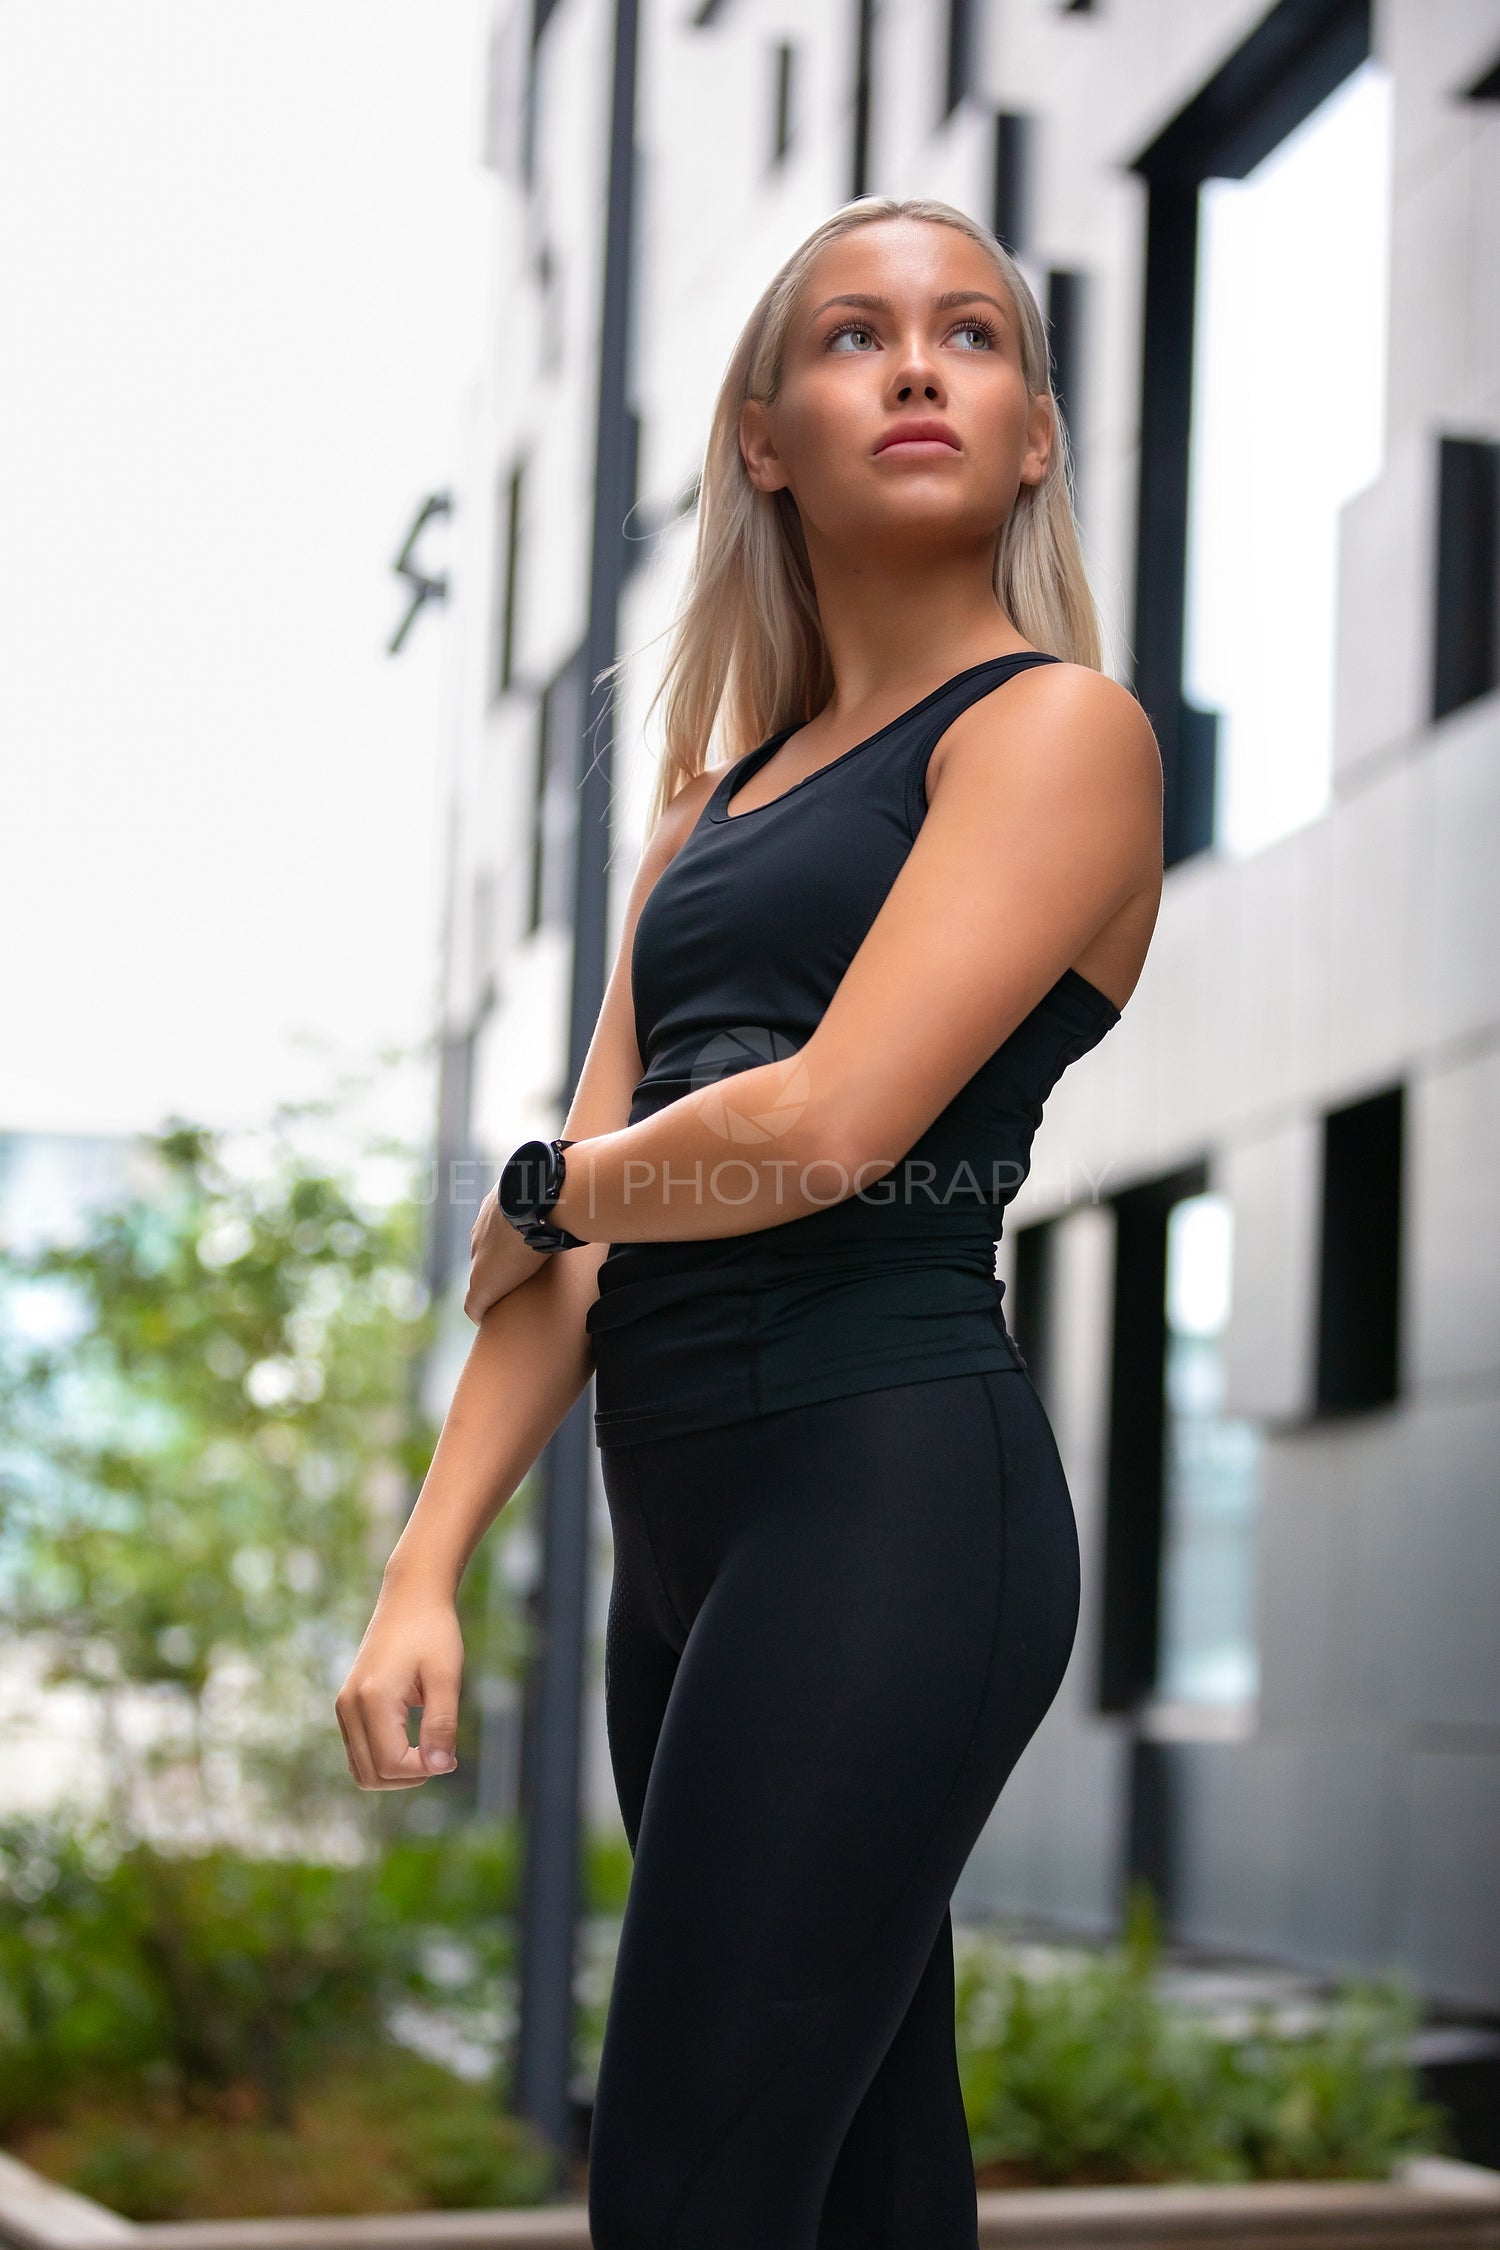 Young Woman in Workout Outfit Standing Against Futuristic Modern Building In City